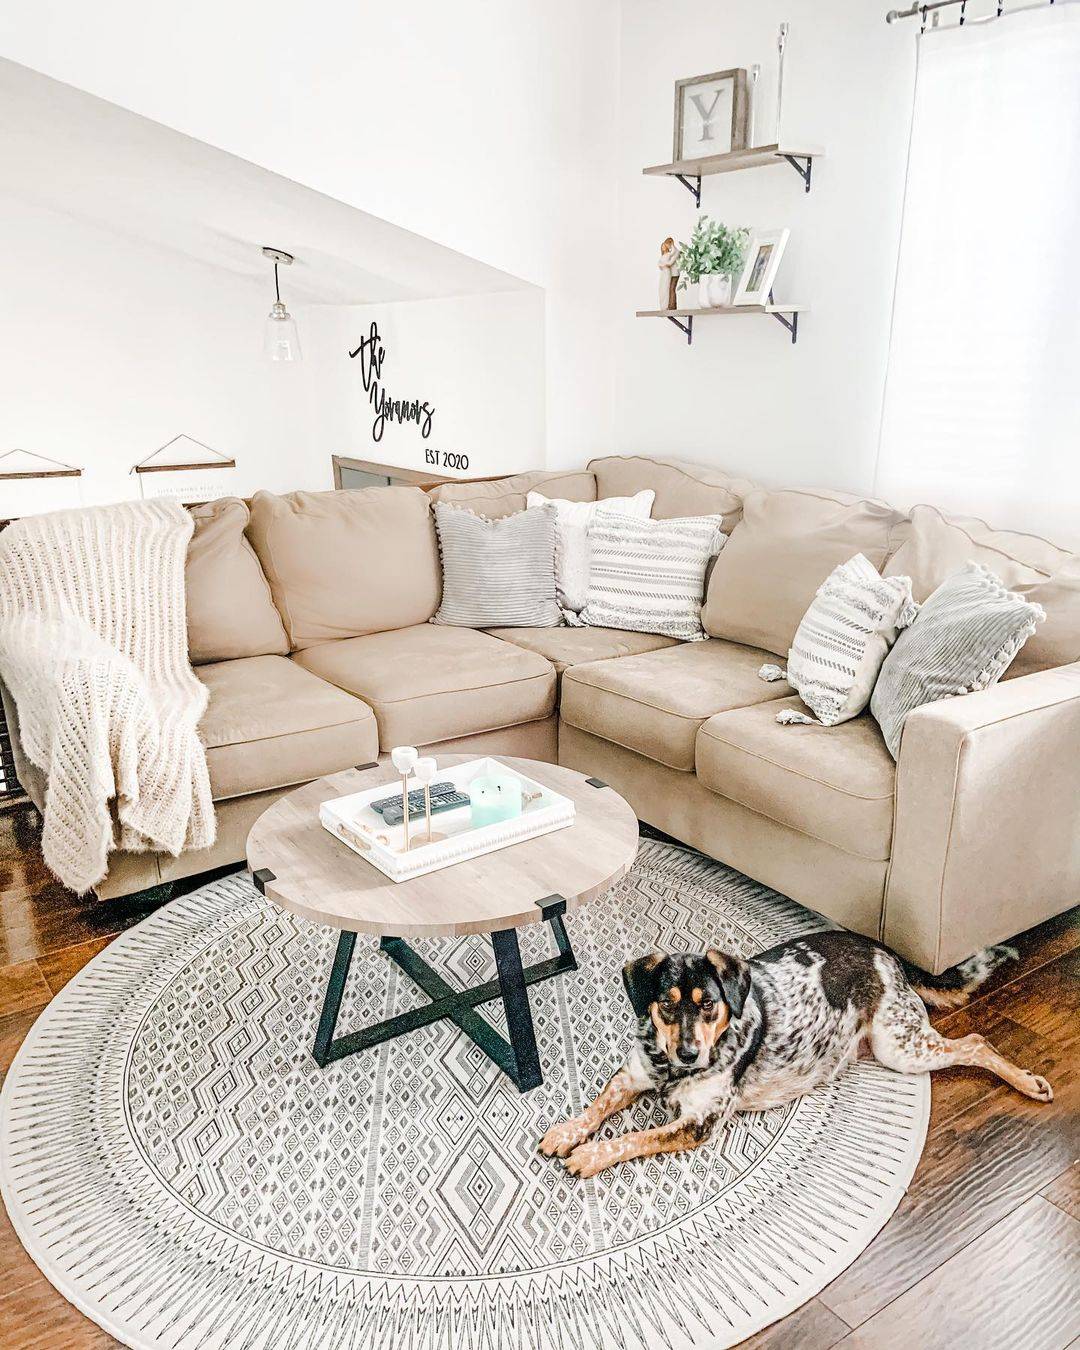  How to Choose the Right Size Accent Rug for the Living Room